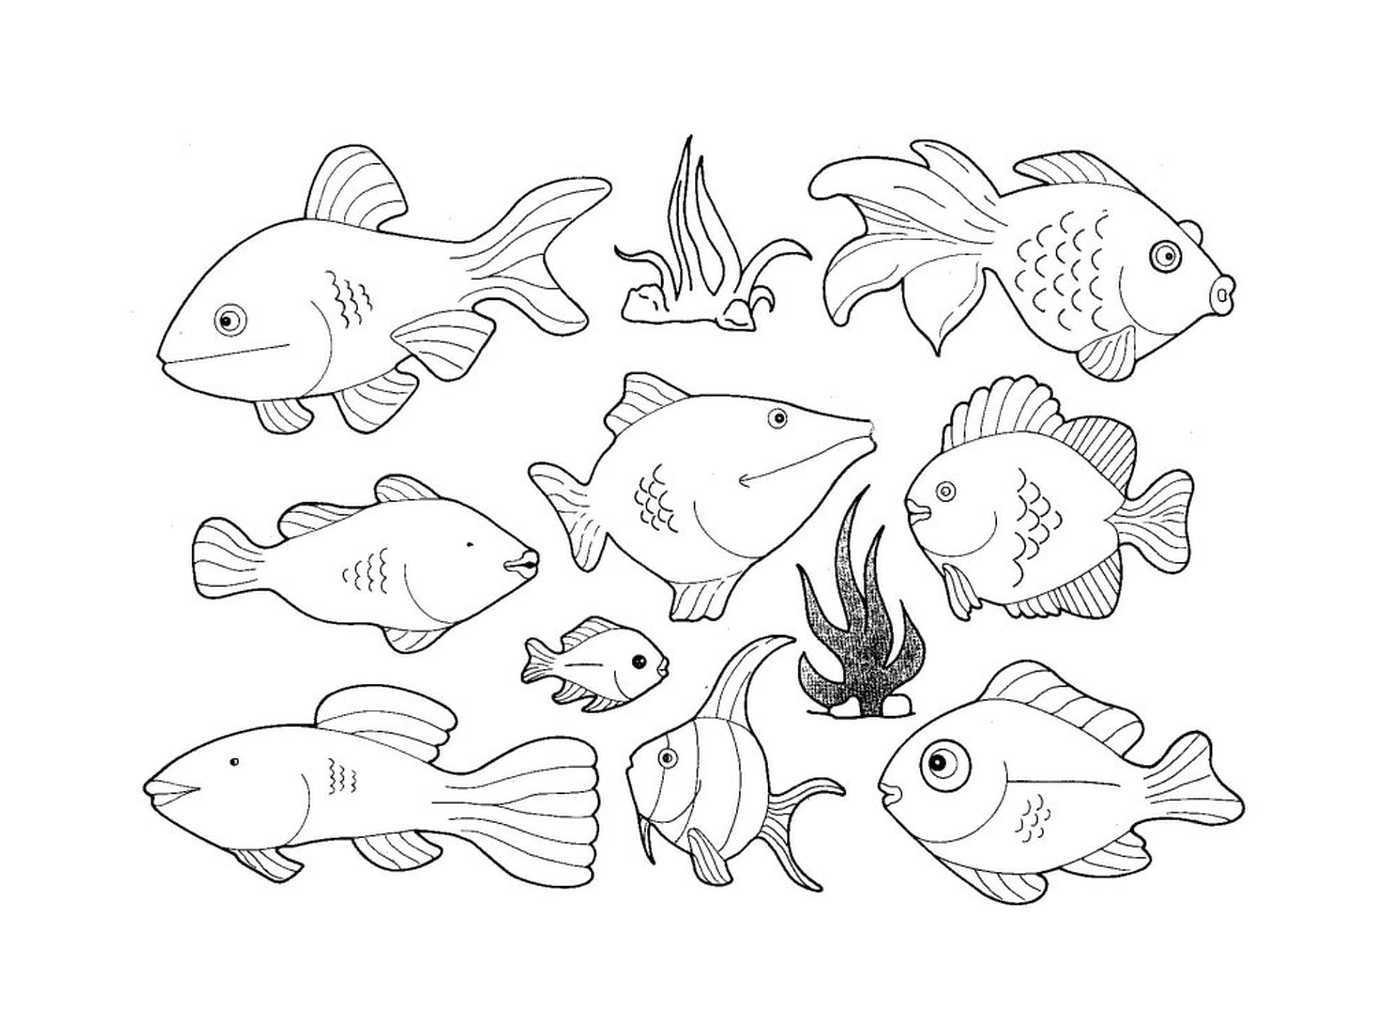  Different types of fish on this page 